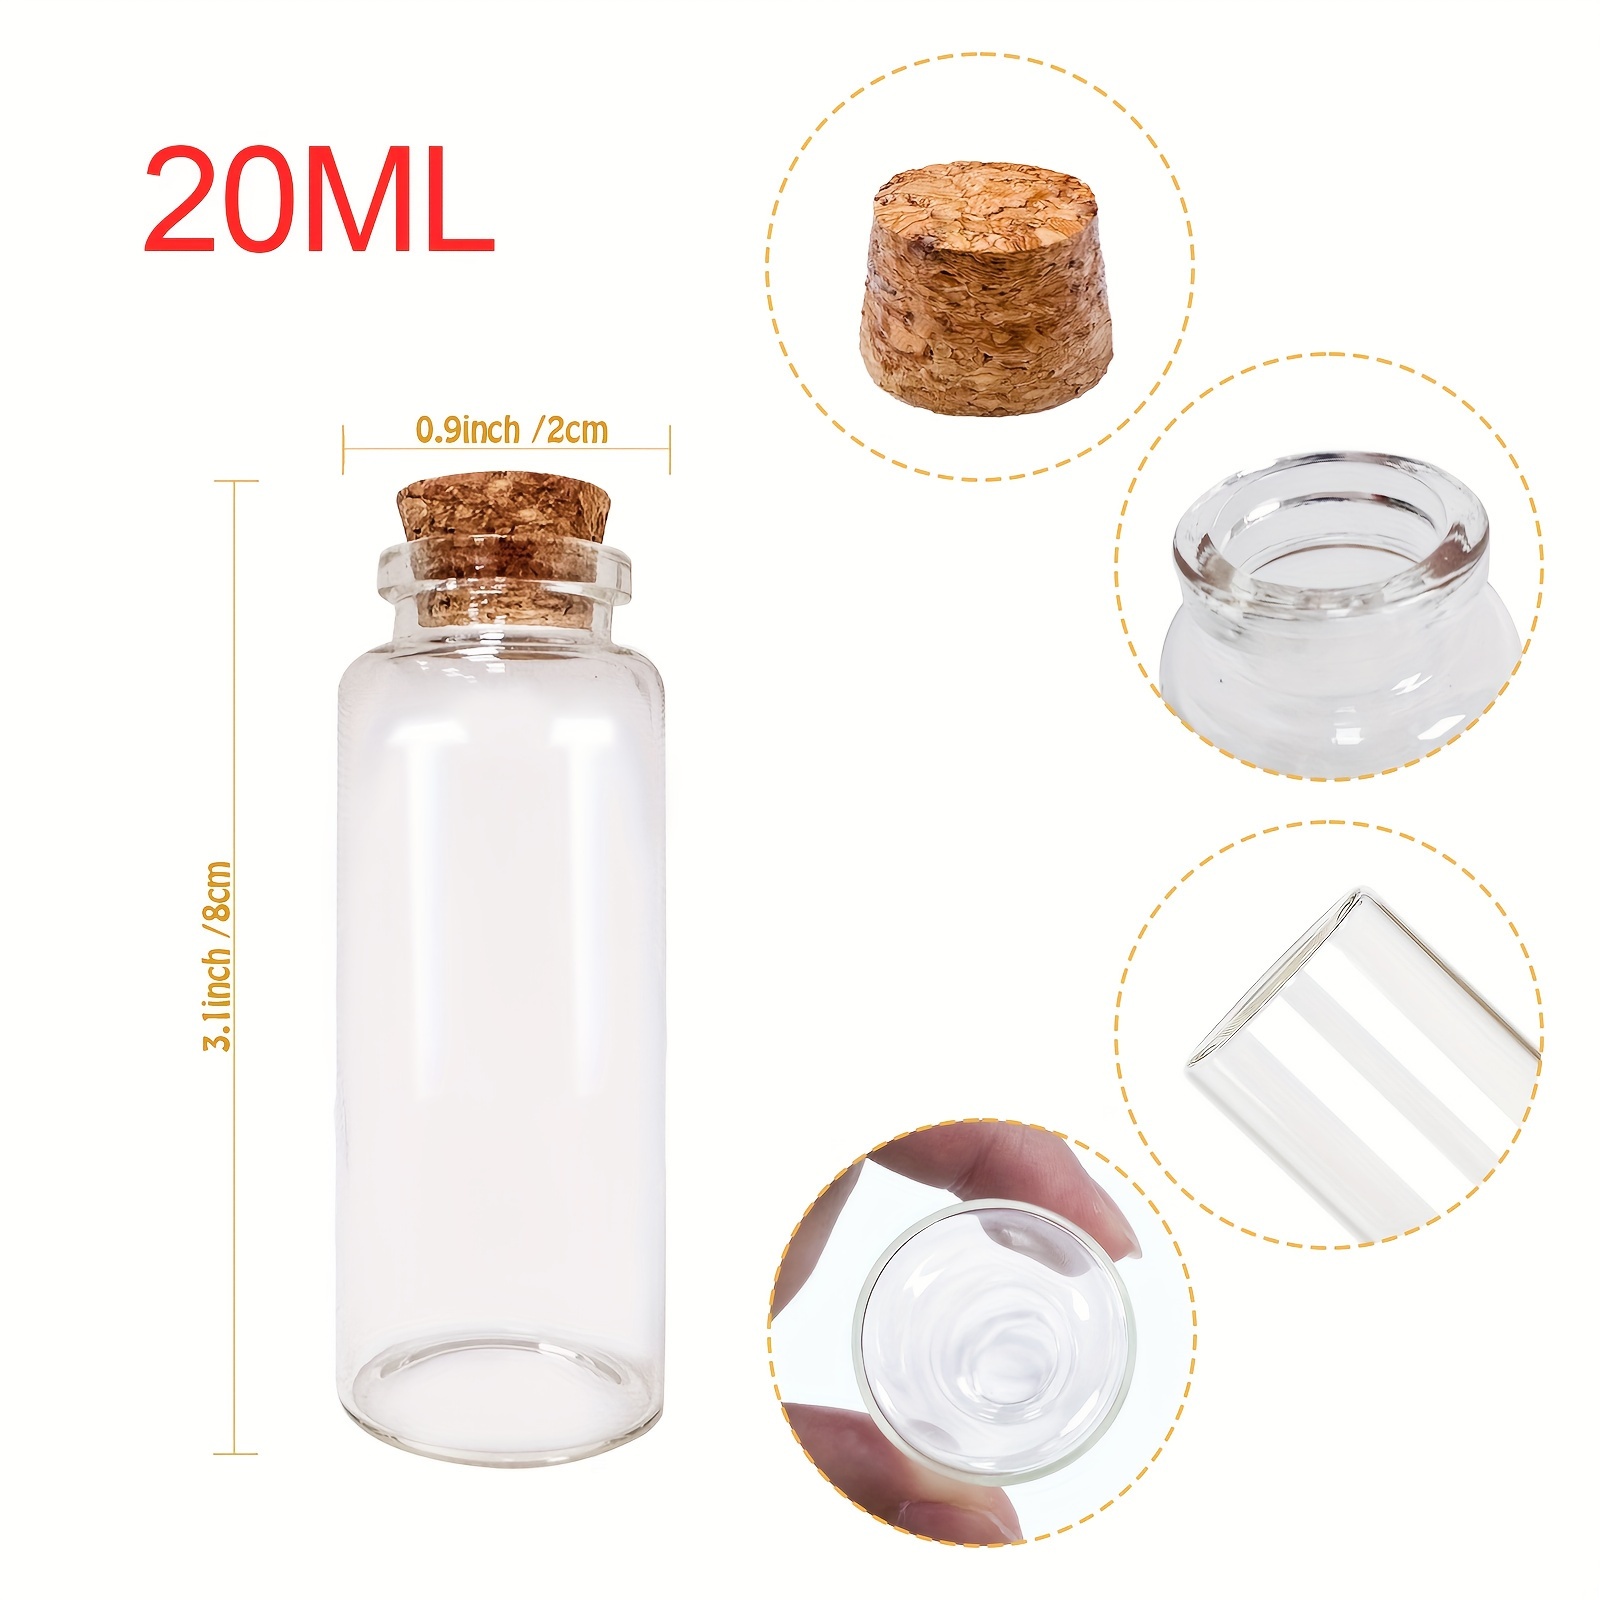 Mini Glass Bottles Cork Stopper Small Empty Glass Bottle With Cork  Decorative Wish Glass Jars Wedding Holiday Containers Craft